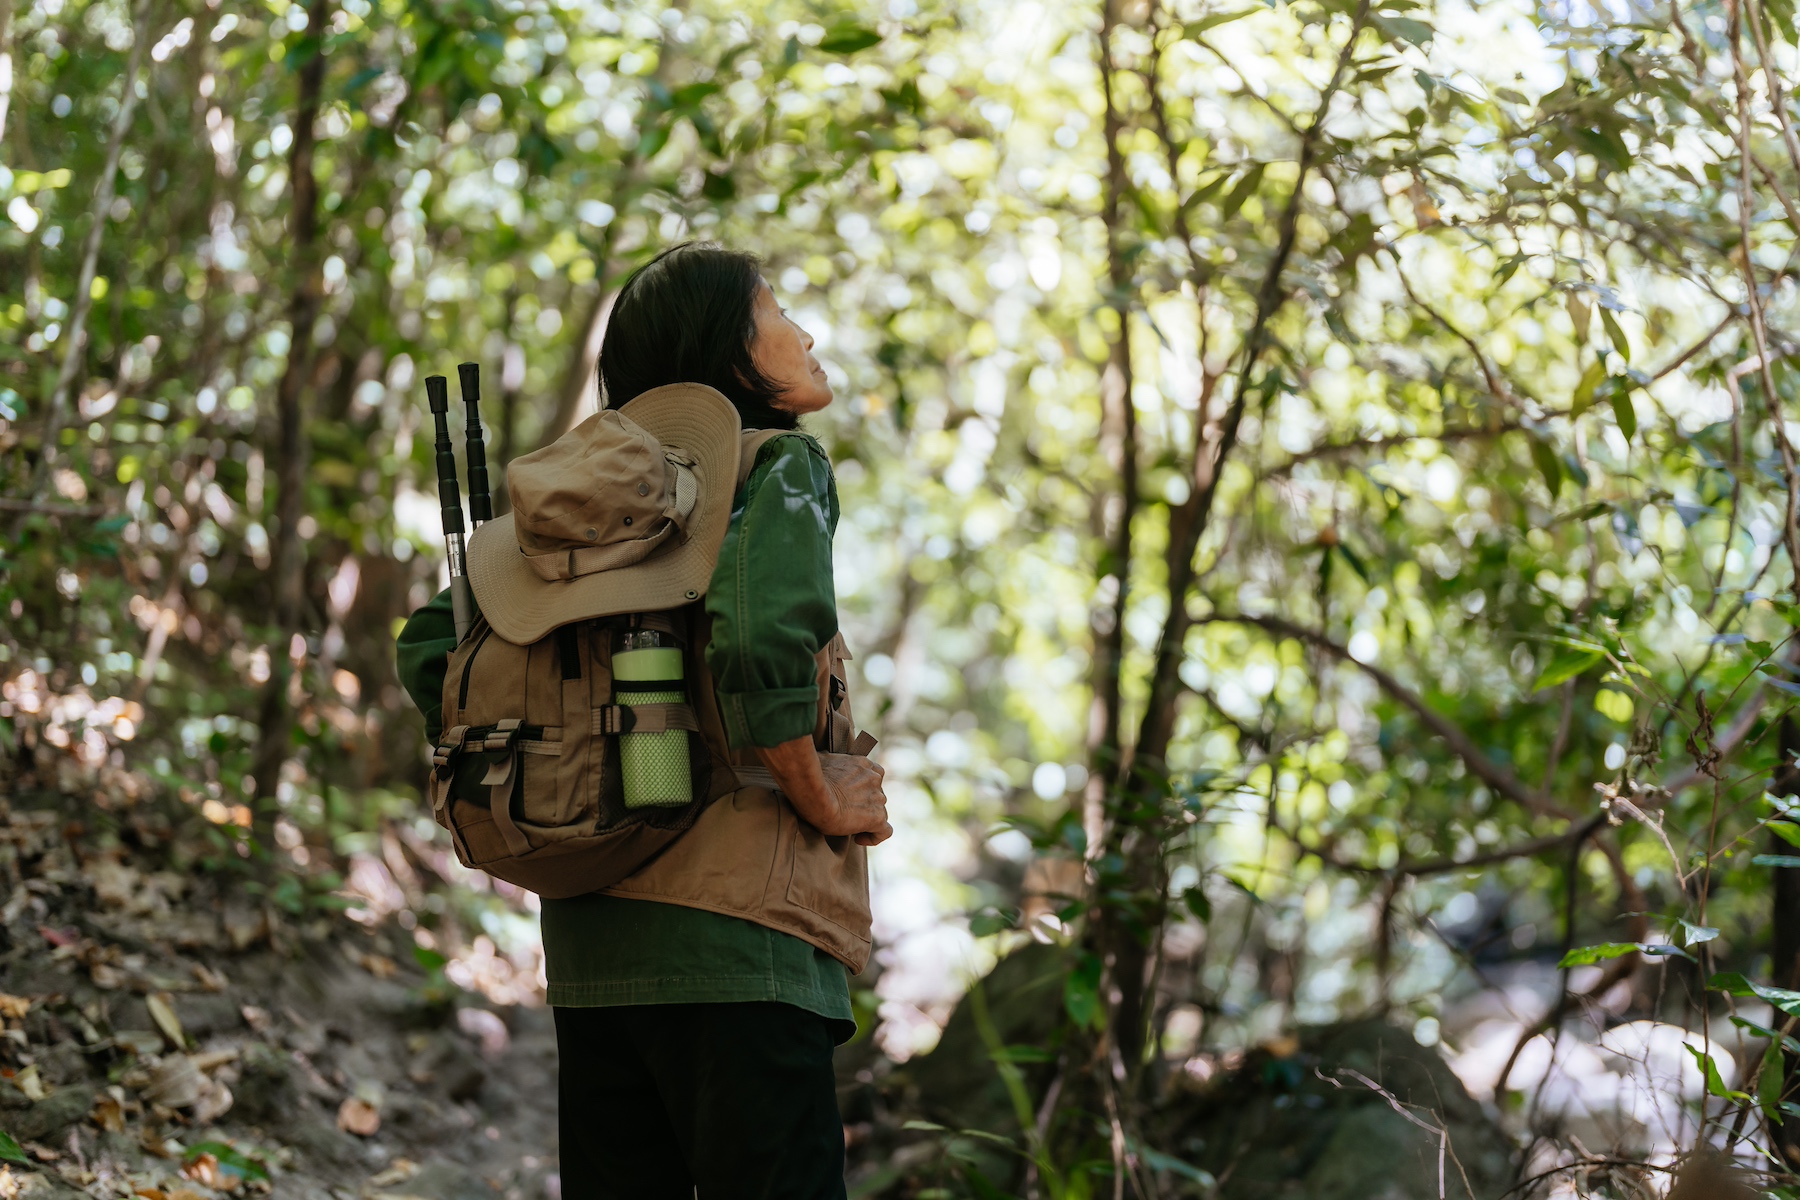 A woman in hiking gear stands alone looking around in the forest